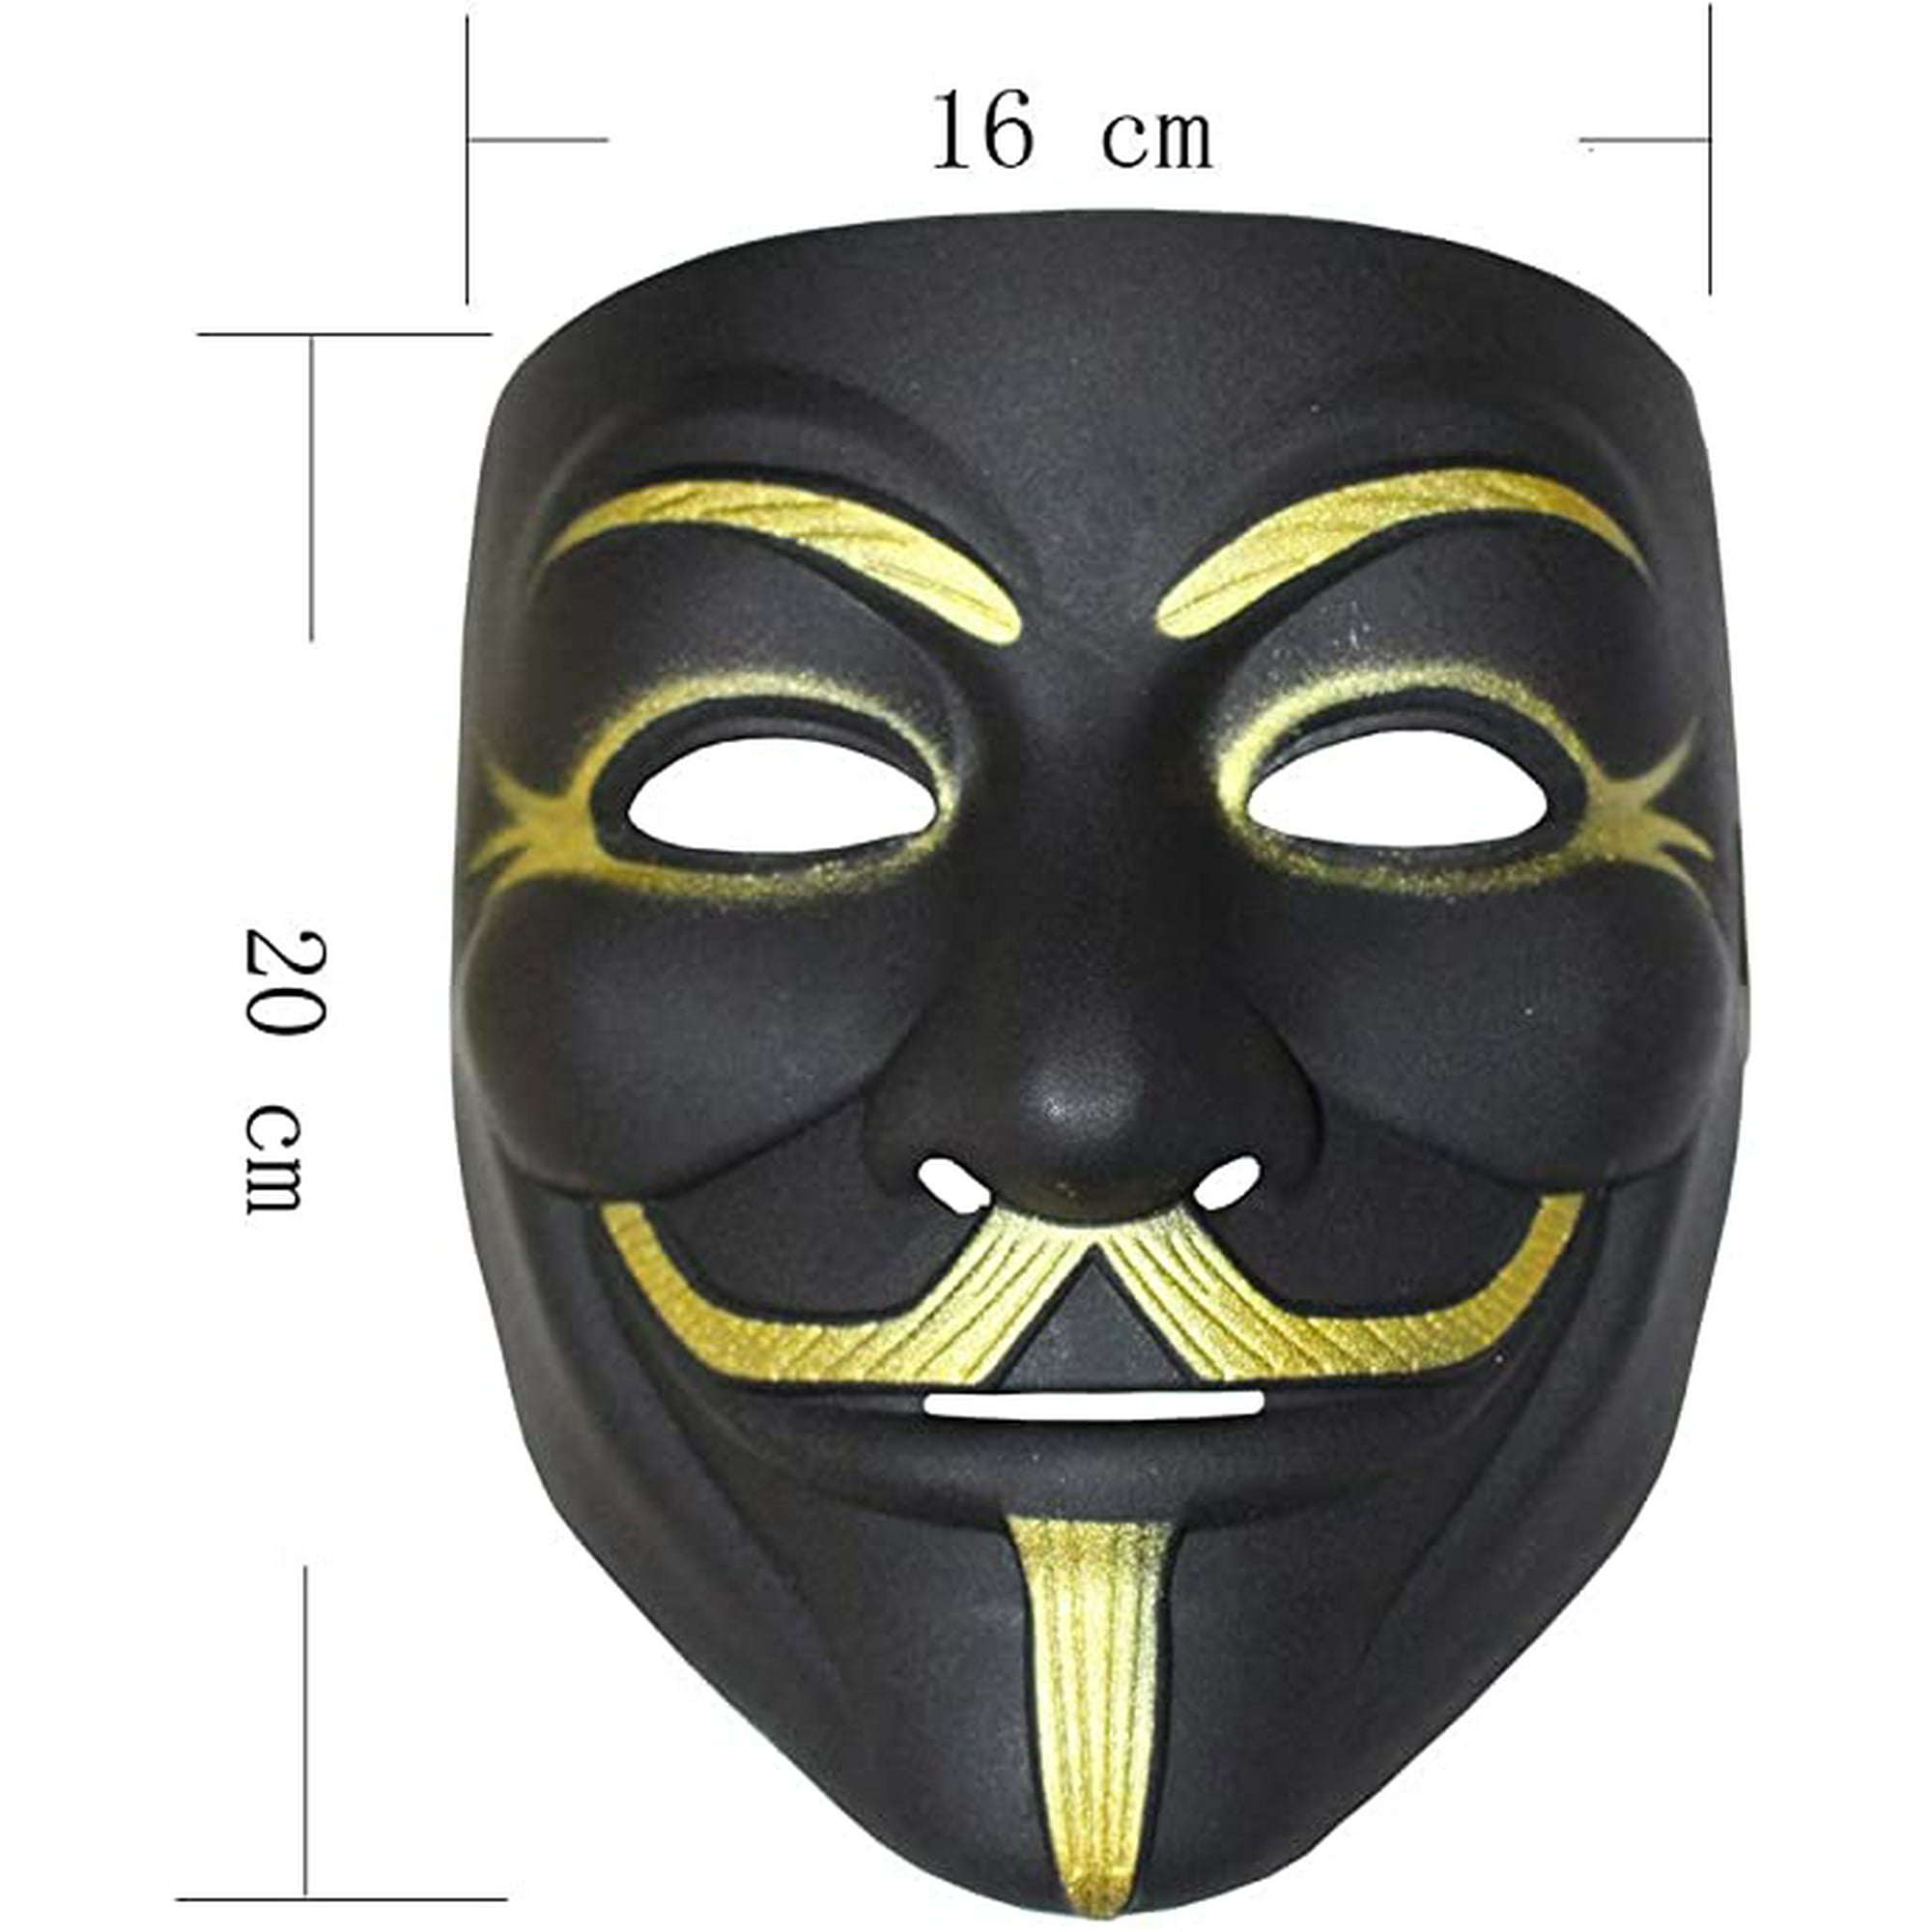 Hacker Mask For Costume Kids Halloween Masks V For Vendetta Mask Anonymous Resin Cosplay Mask Party Prop Toys Walmart Canada - roblox hacker mask catalog